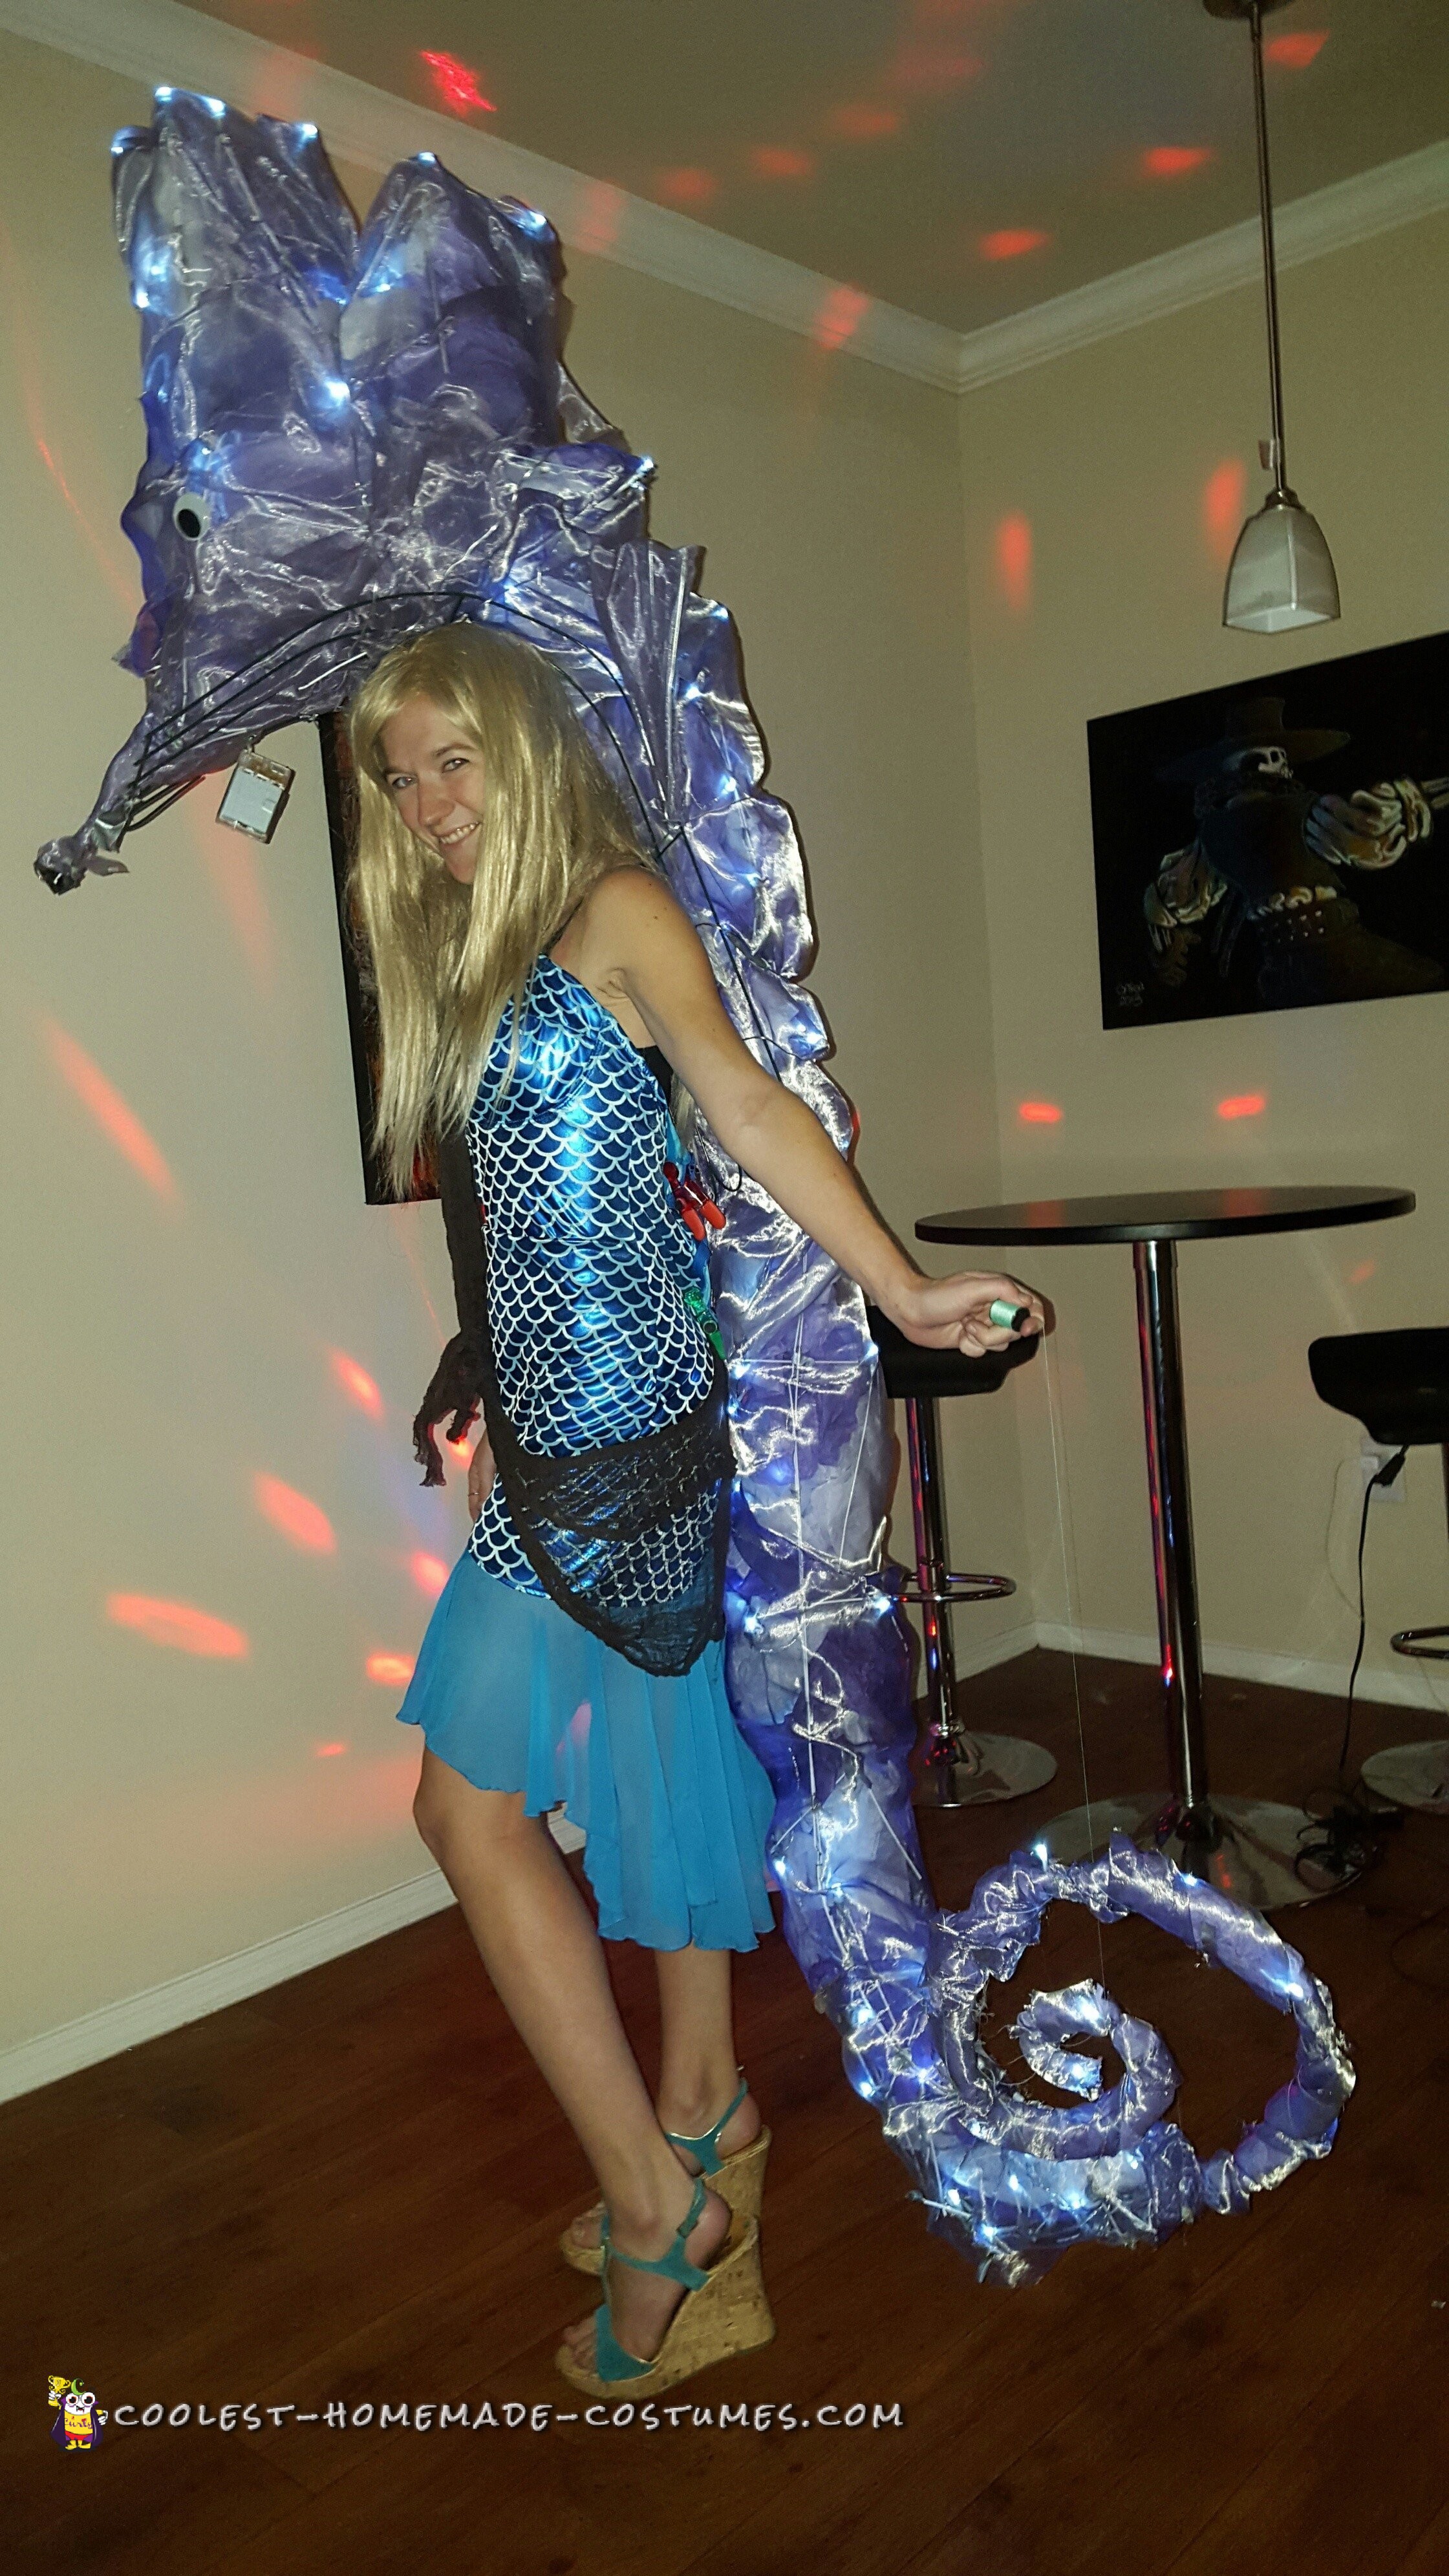 Insanely Awesome Light-Up Seahorse Costume!